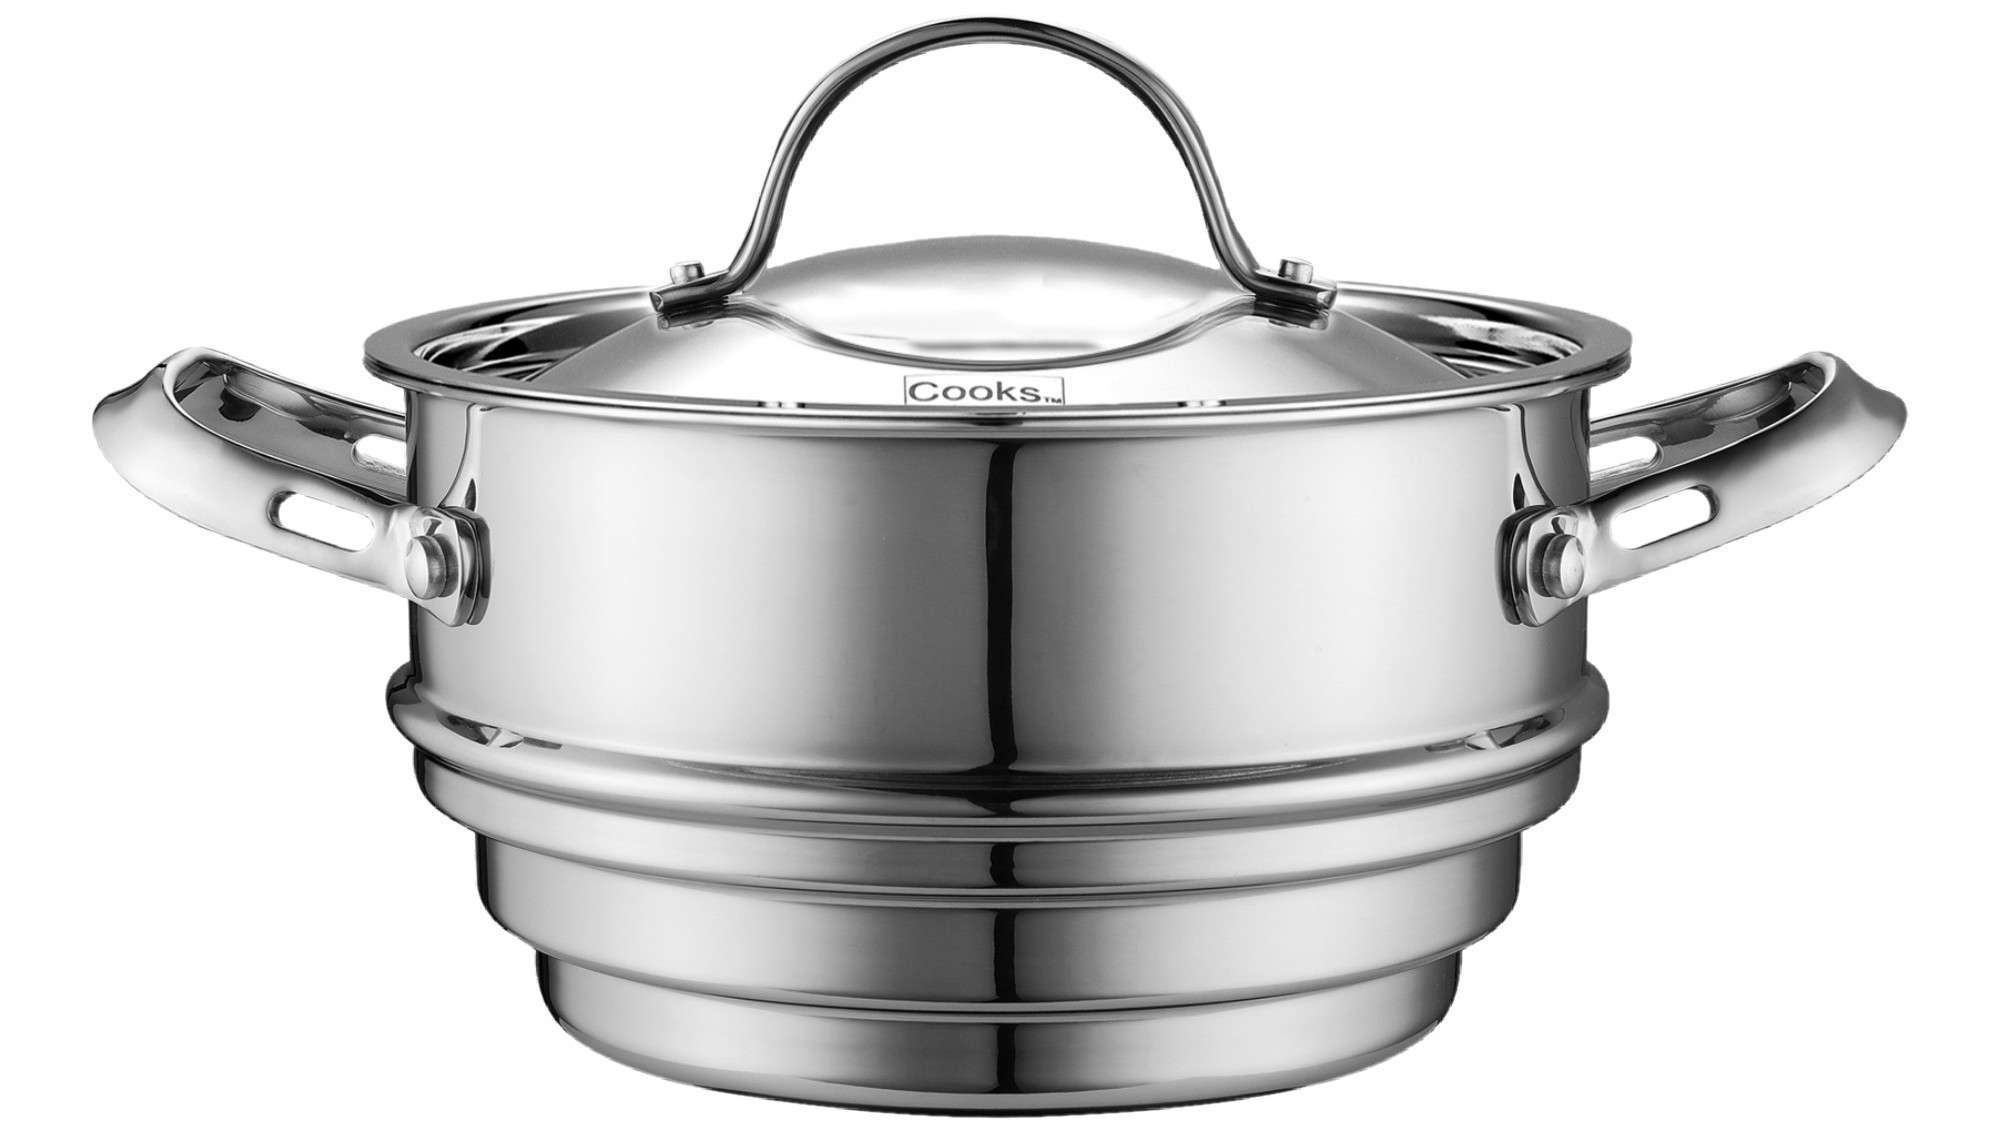 Cook Standard Multi size Steamer fit Both 1.5QT and 3 QT Sauce Pan Stainless steel